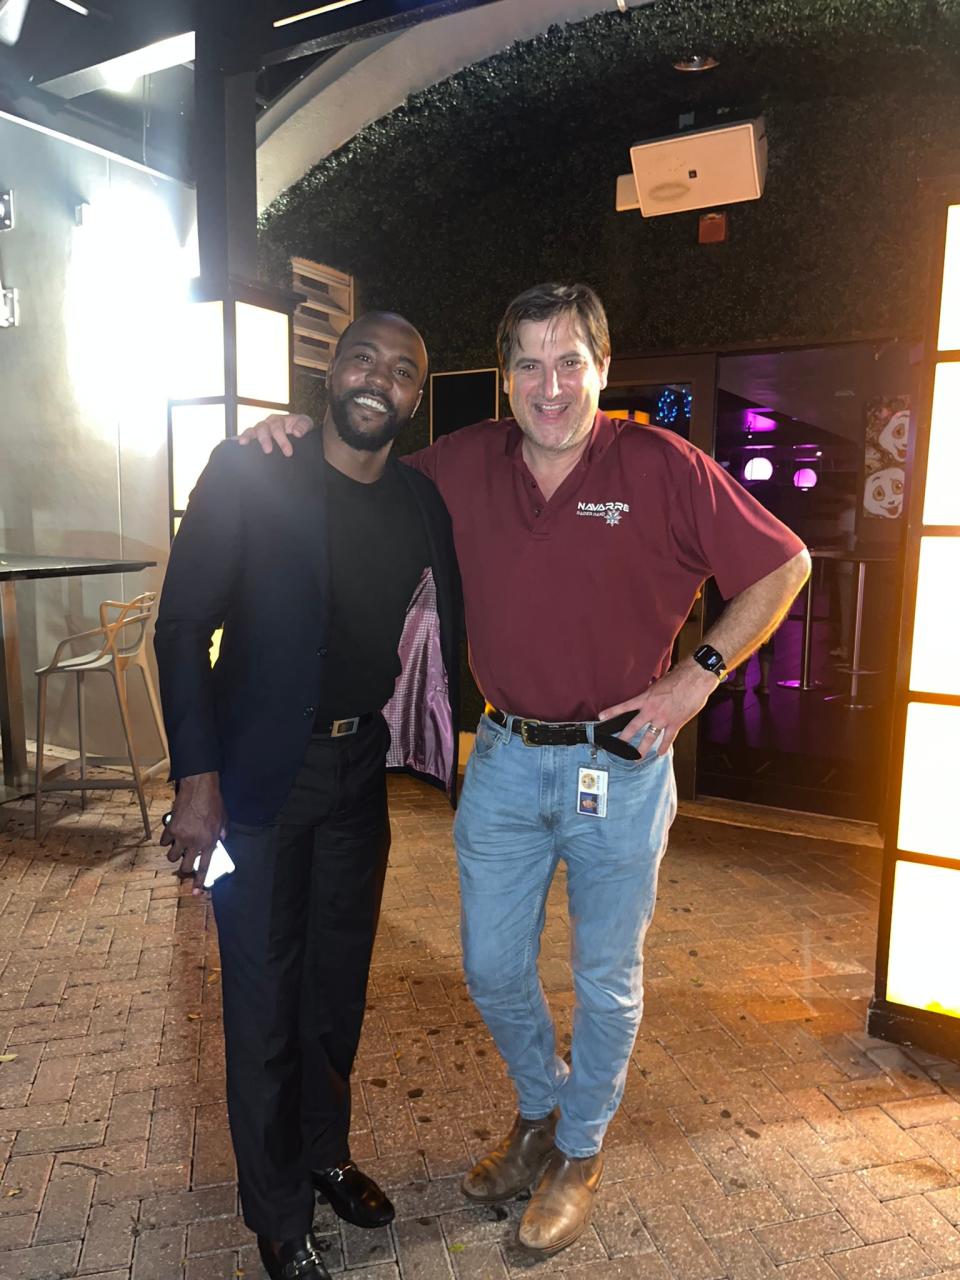 State Rep. Jervonte Edmonds, left, a Democrat from West Palm Beach, and Dr. Joel Rudman, right, a Republican representative from the Panhandle. The two have reached across the aisle to find common ground. They are seen here at the SALT7 restaurant in Delray Beach.